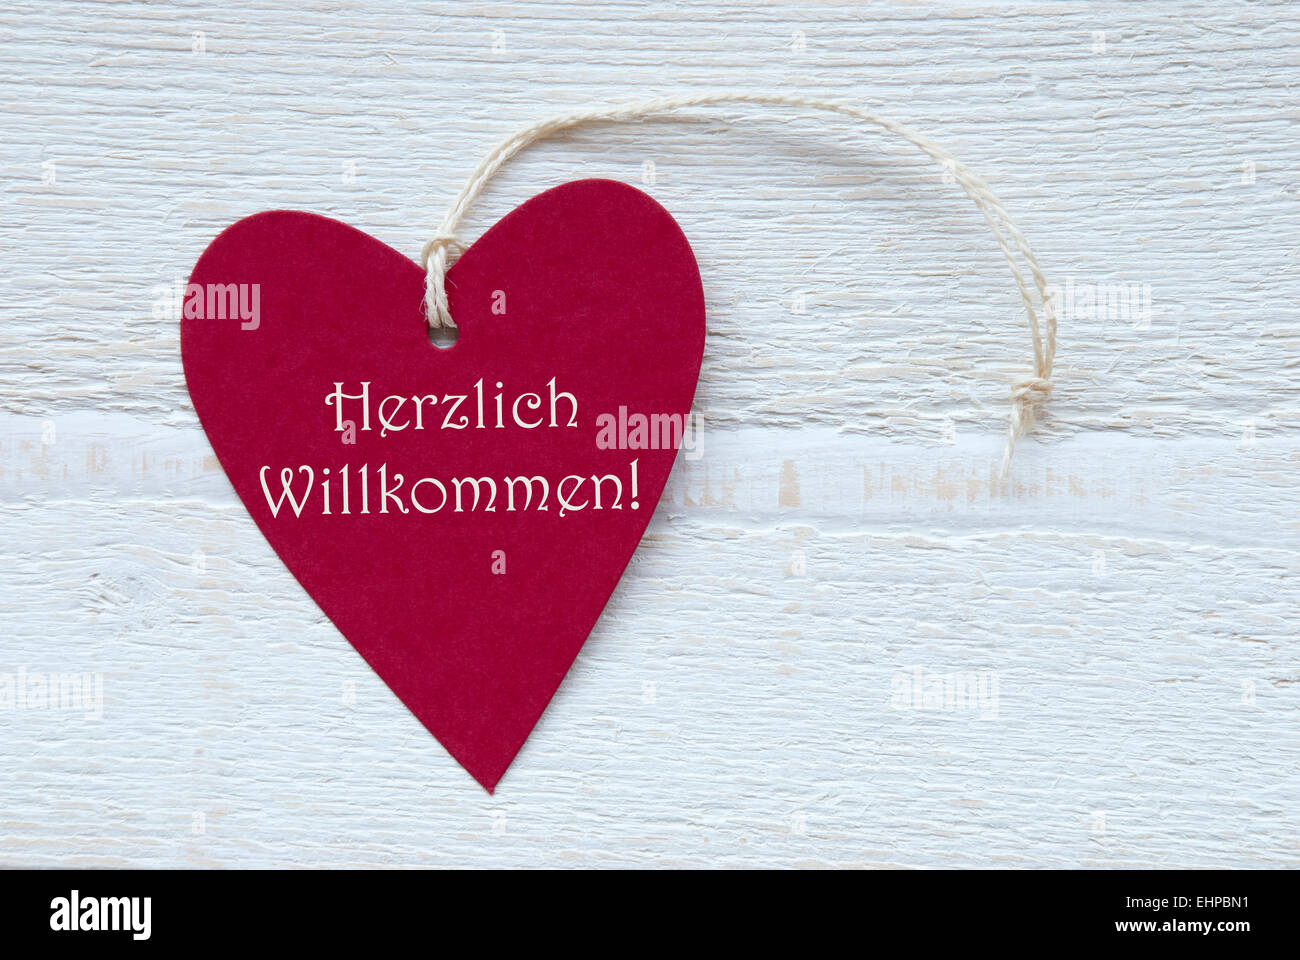 One Red Heart Label Or Tag With White Ribbon On White Wooden Background With German Text Herzlich Willkommen Means Happy Welcome Stock Photo